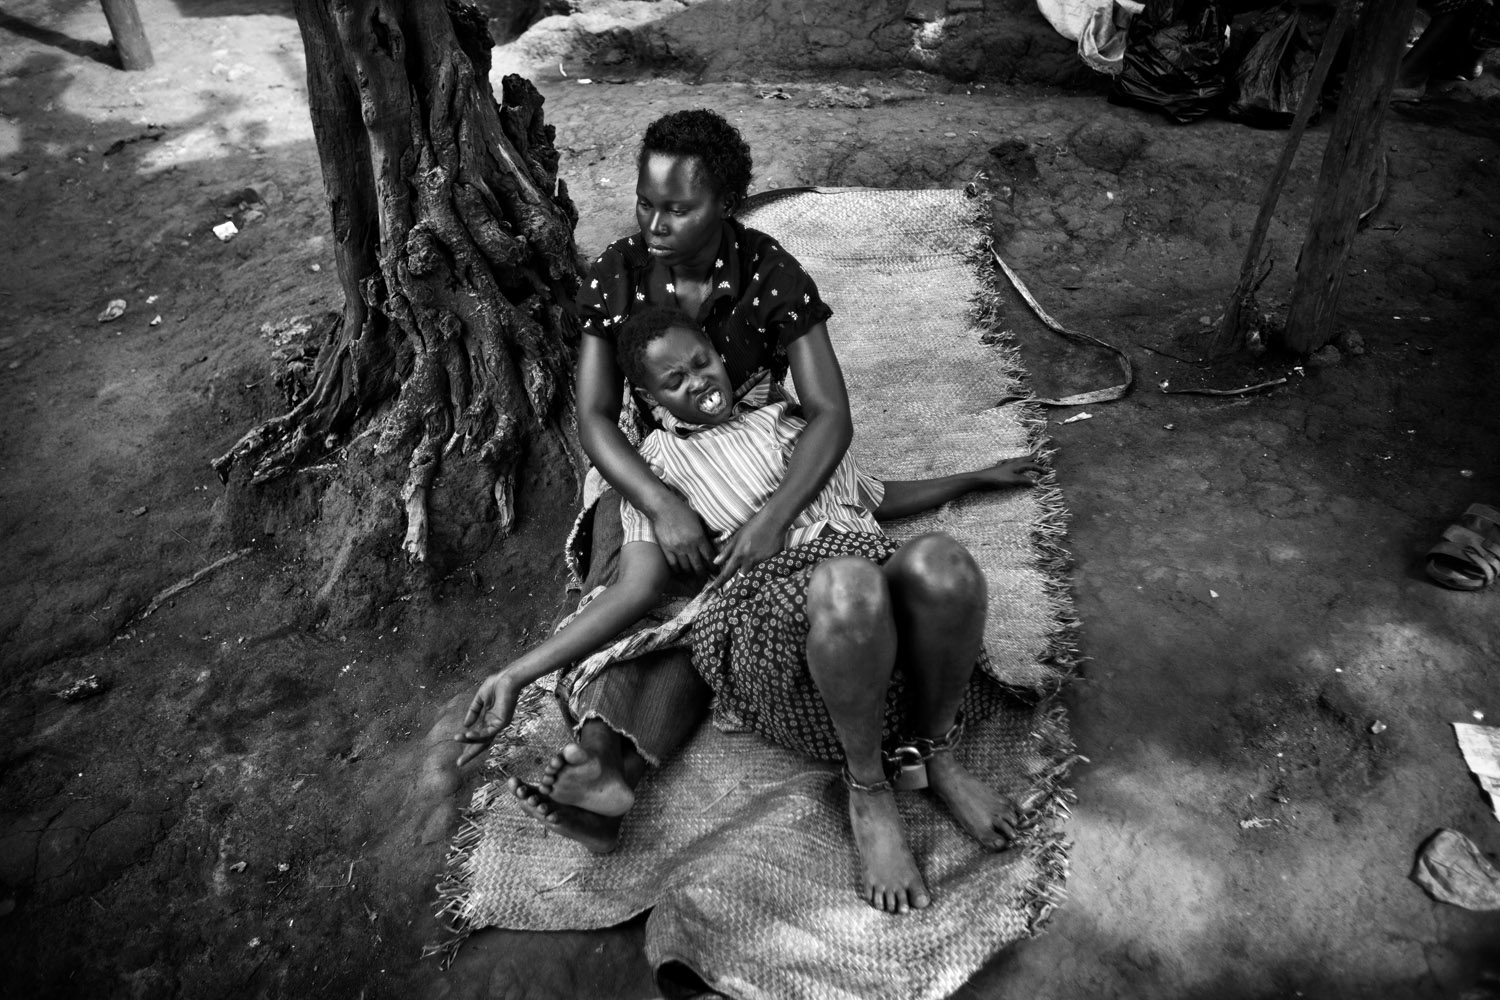 A chained patient awaits treatment at the clinic of a traditional healer. Kampala, Uganda. April 2011.